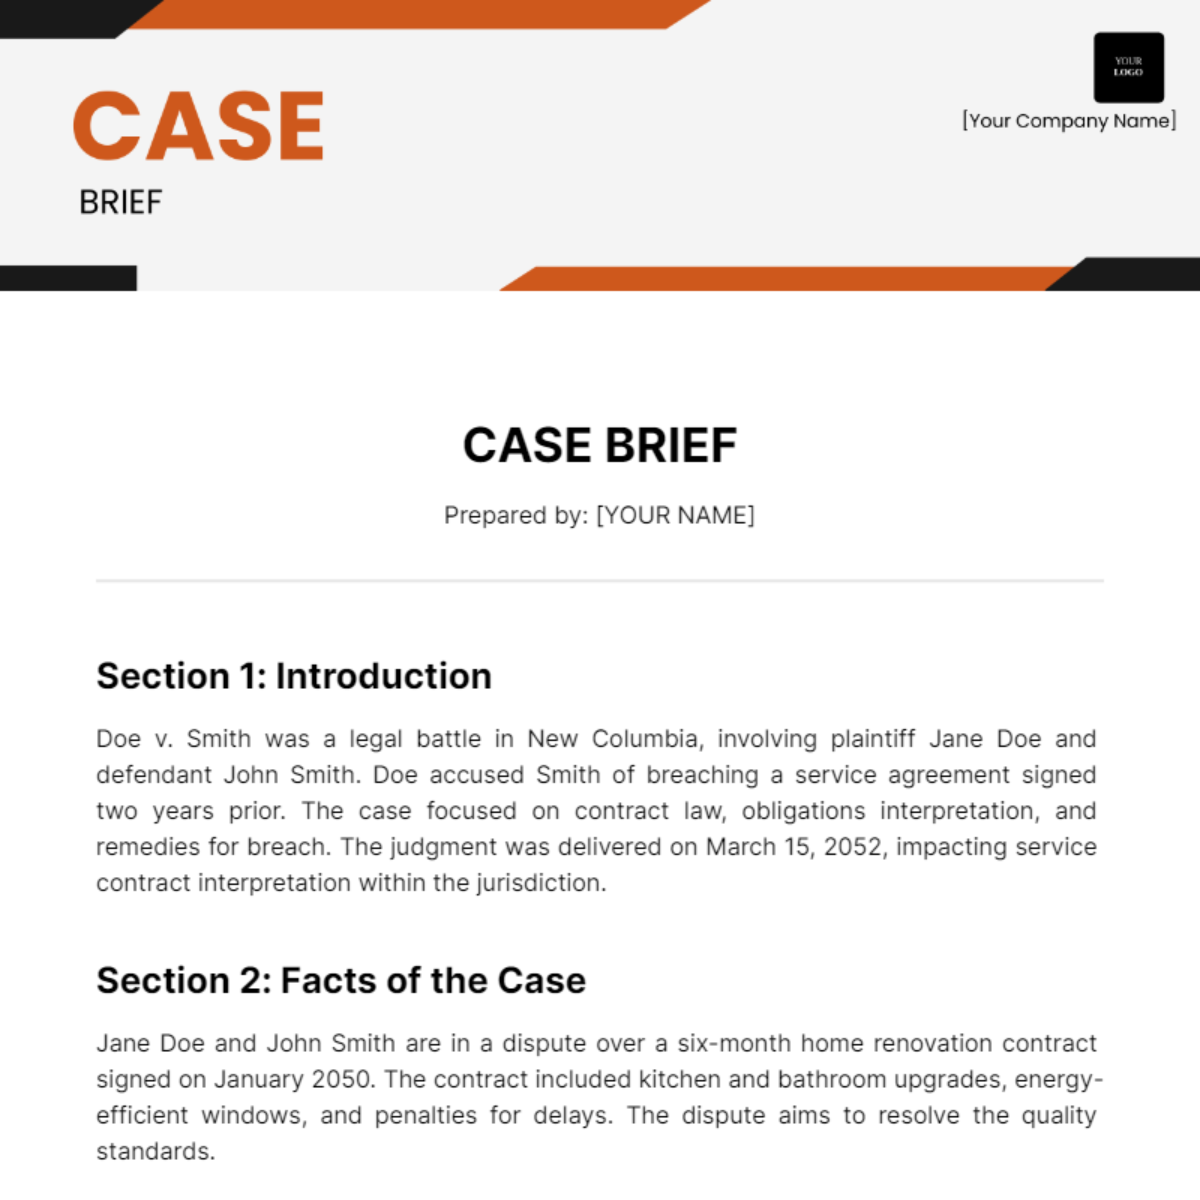 Basic Brief Template - Edit Online & Download Example